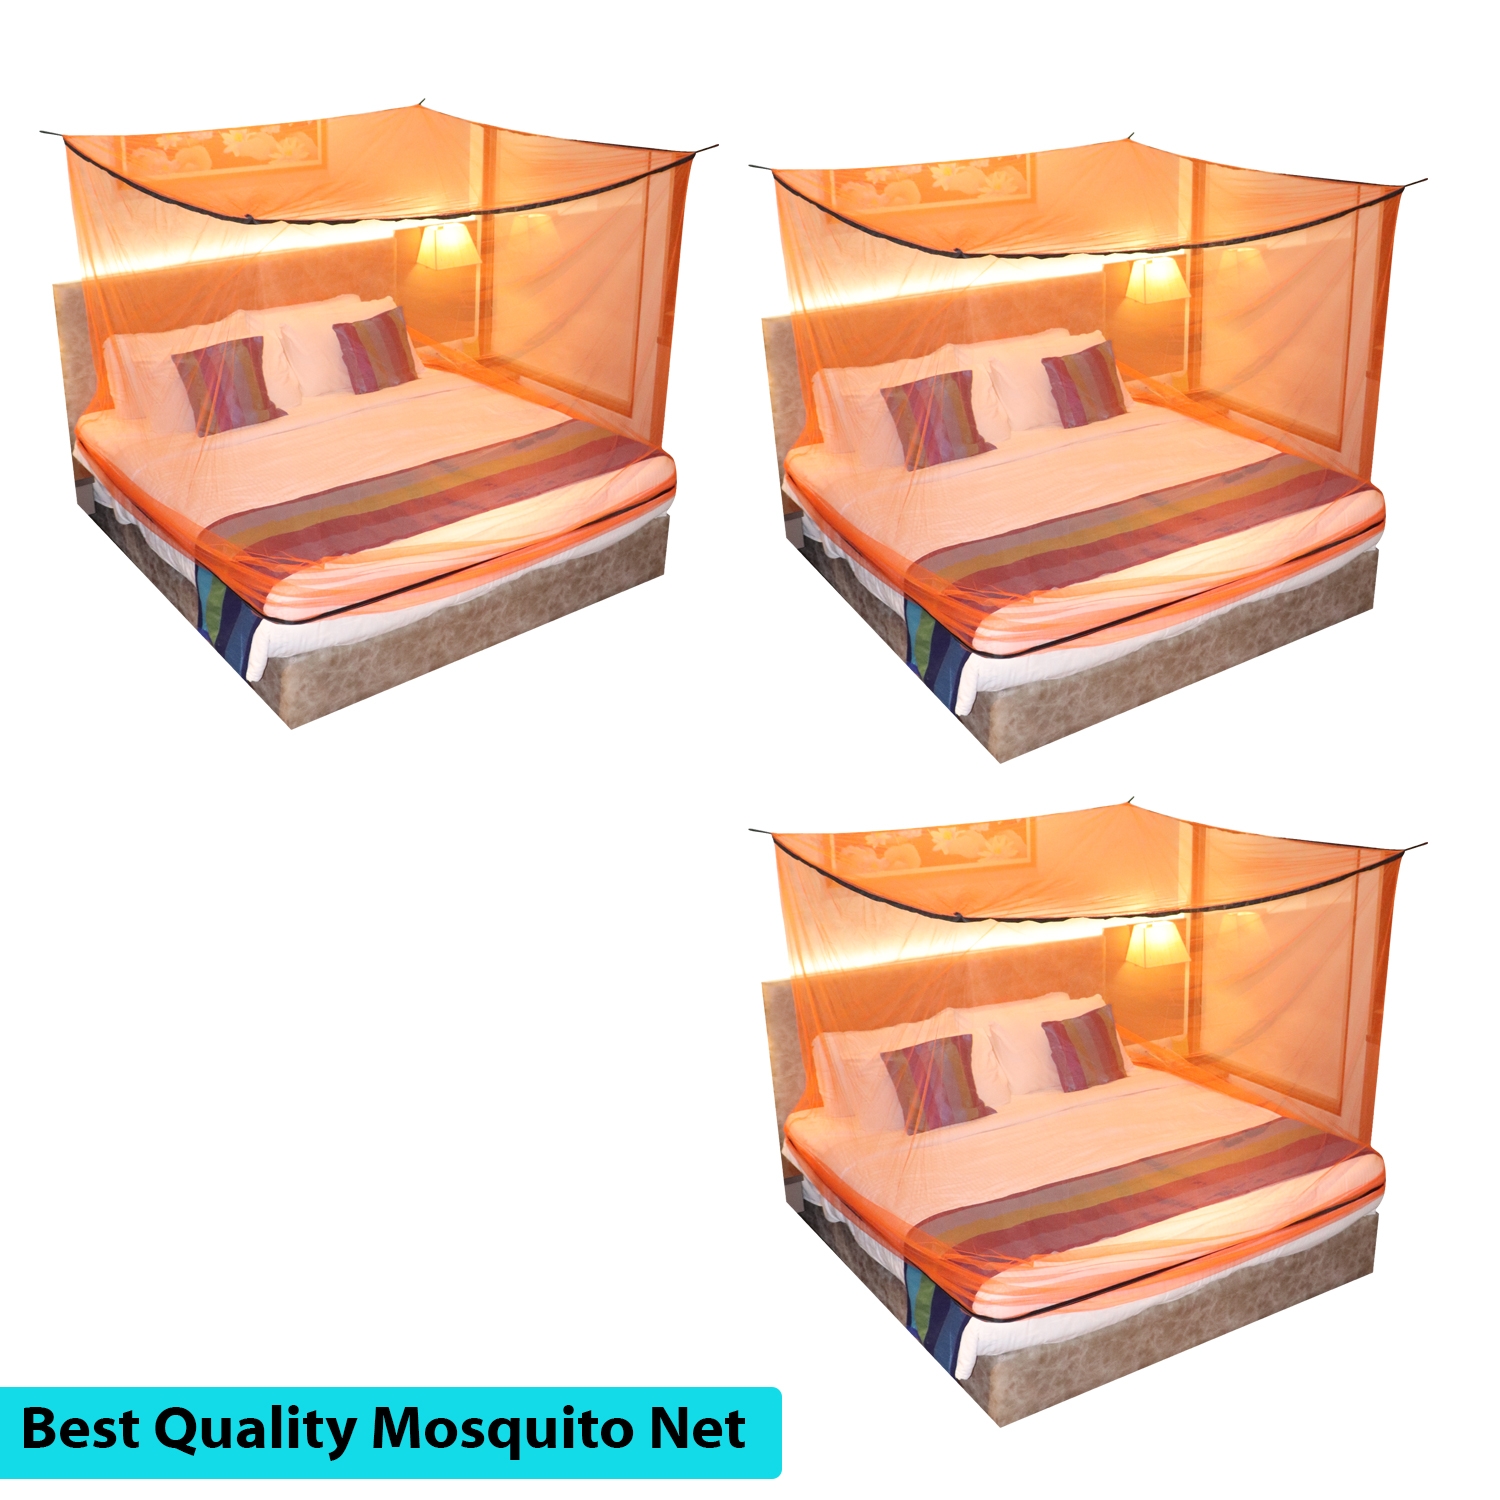 Paola Jewels | Mosquito Net for Double Bed, King-Size, Square Hanging Foldable Polyester Net Orange And Black Pack of 3 0